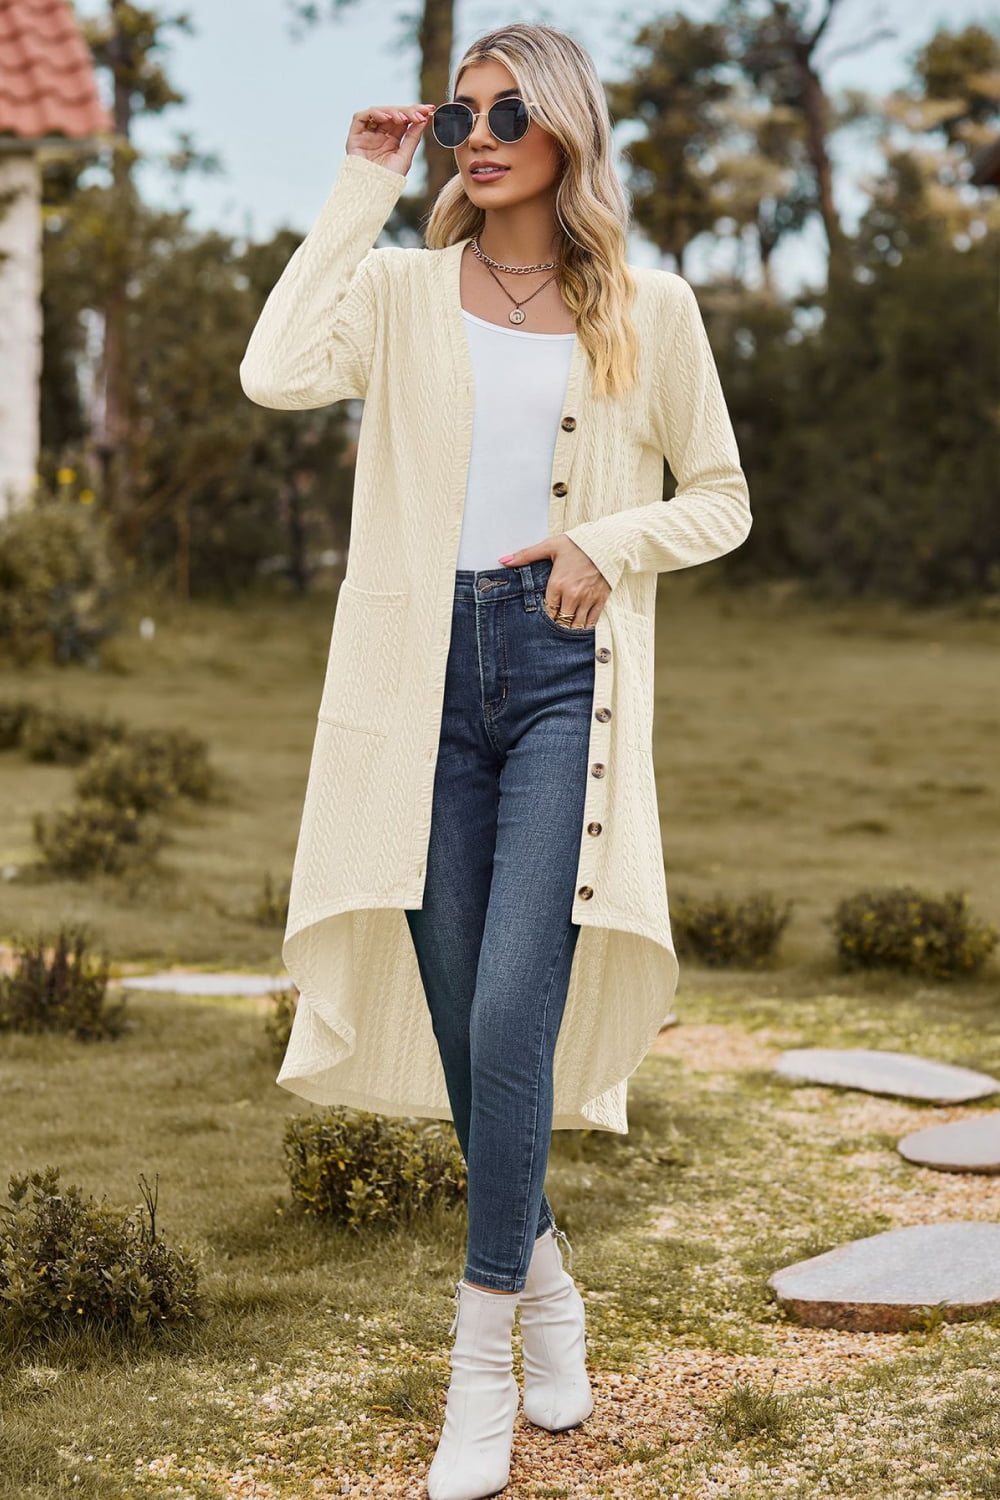 V-Neck Long Sleeve Cardigan with Pocket - Women’s Clothing & Accessories - Shirts & Tops - 10 - 2024